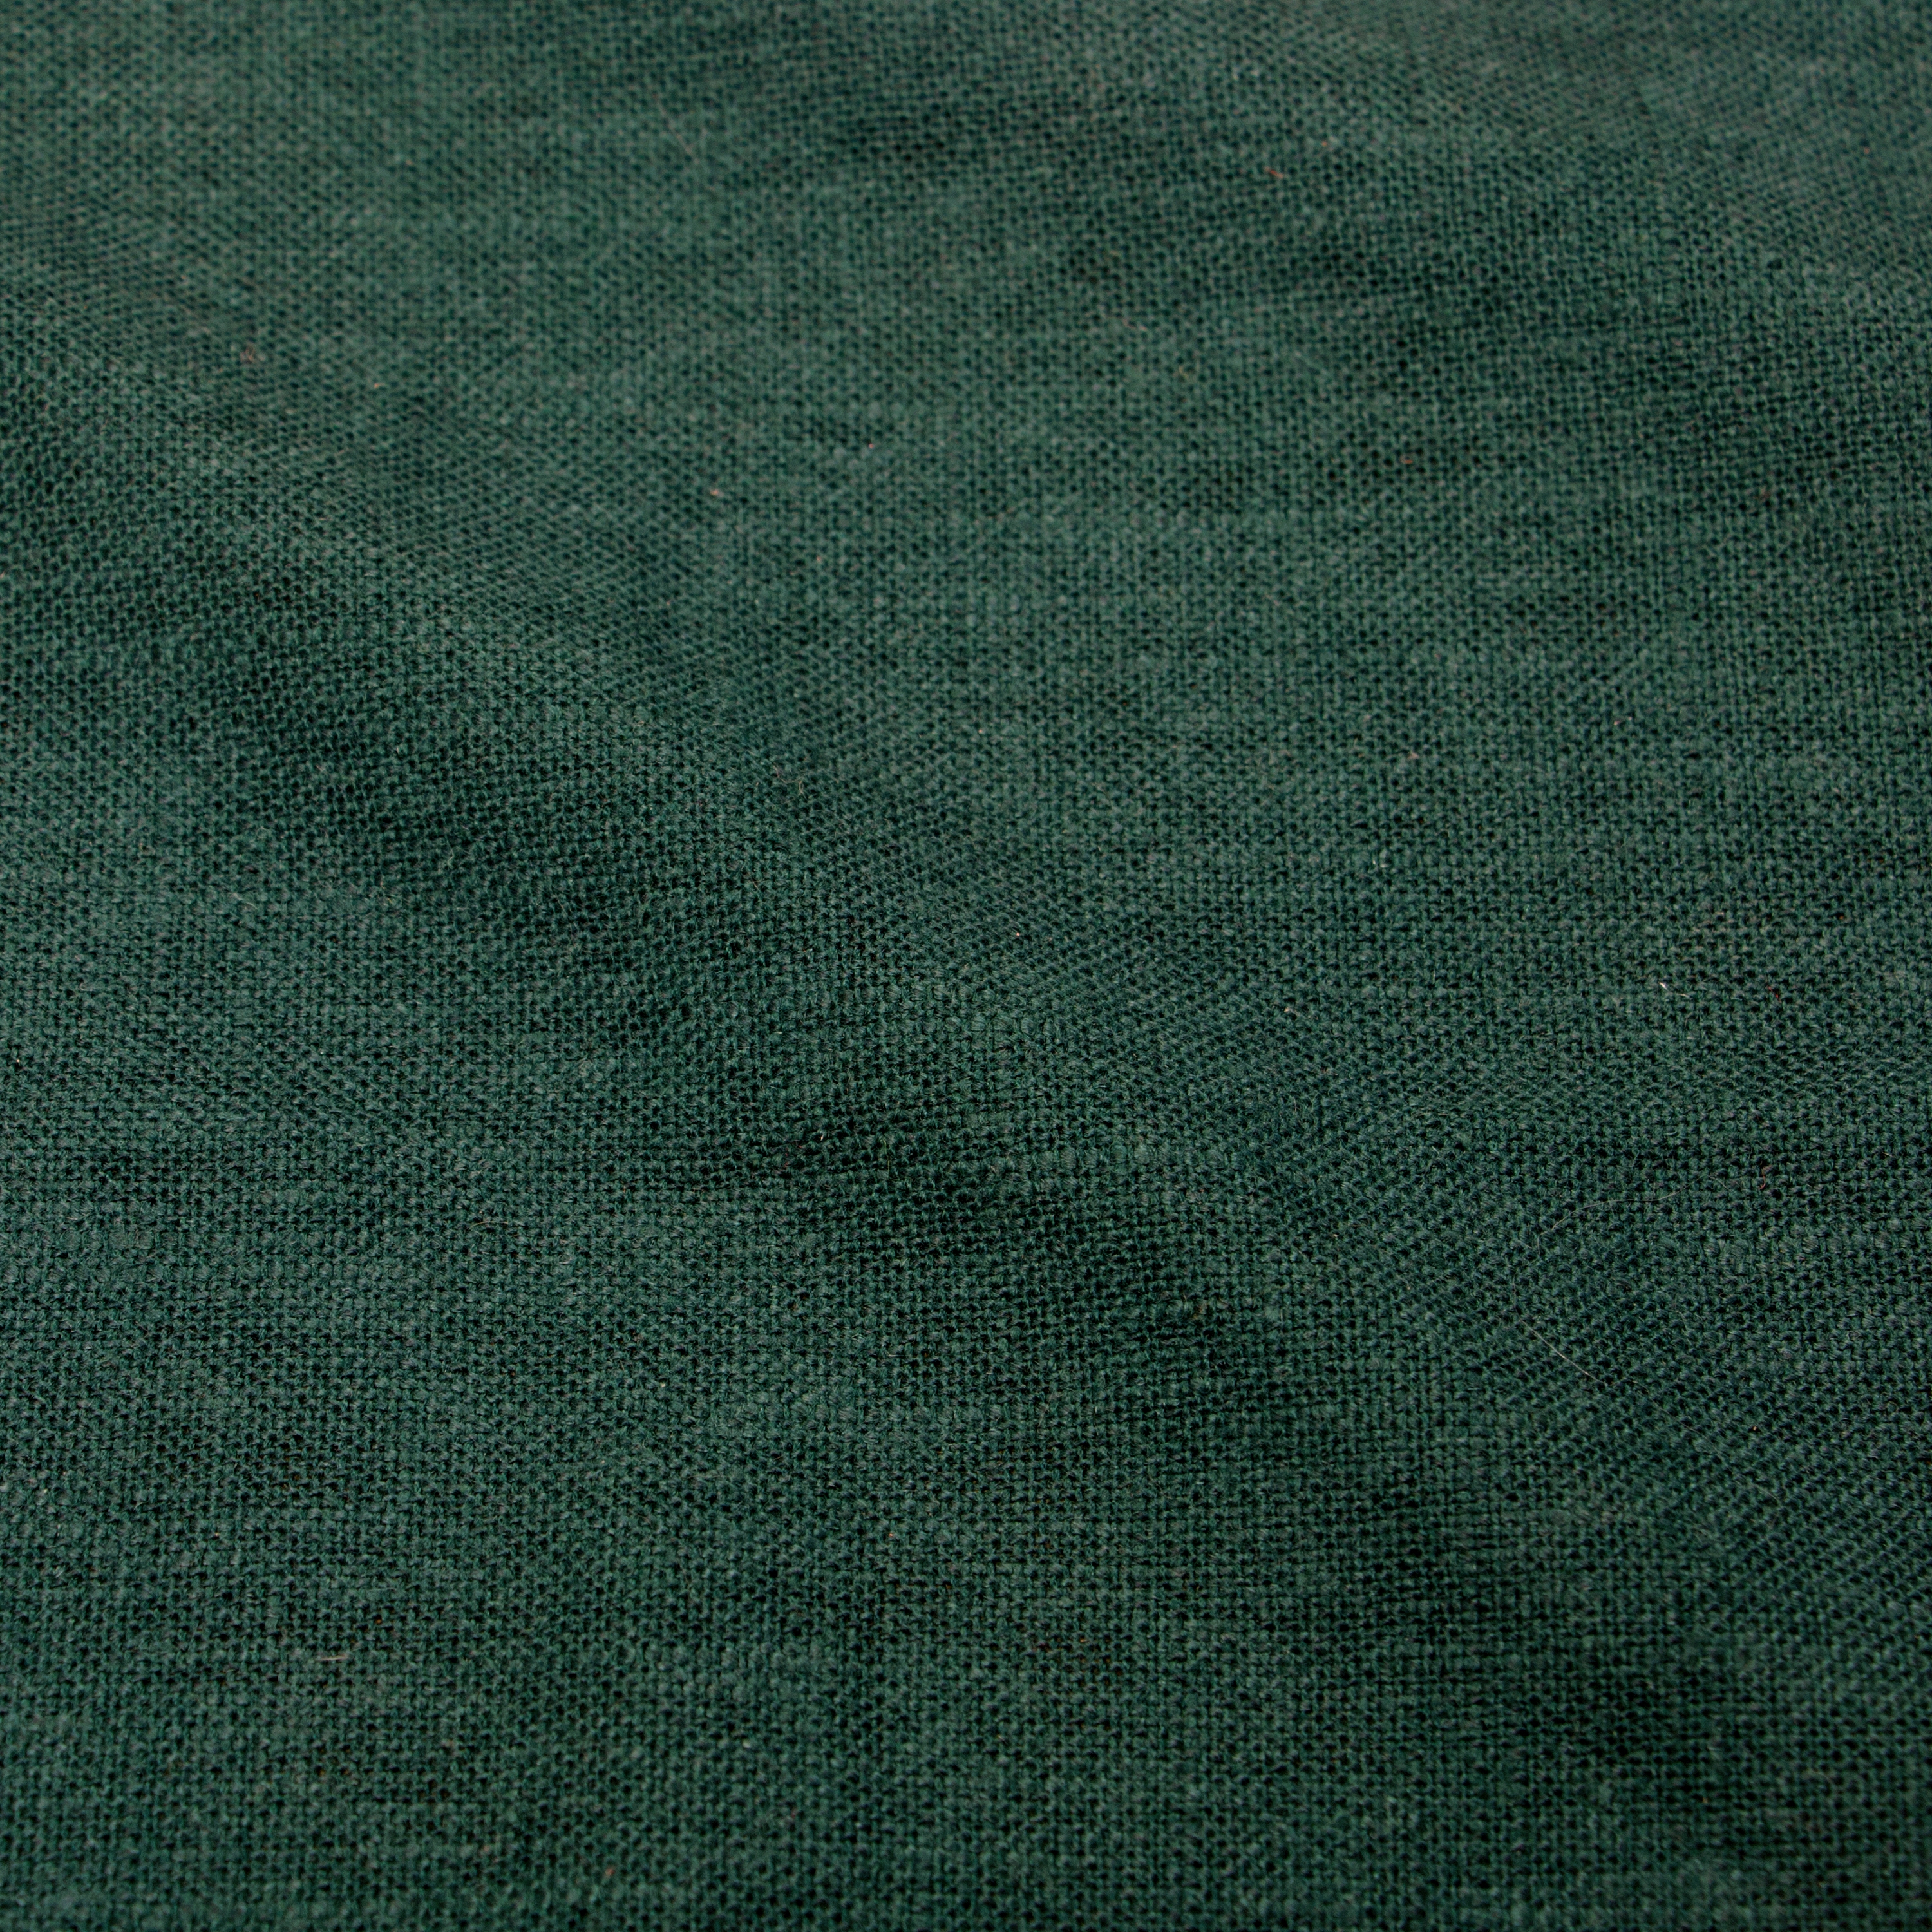 Conifer Green Curtain Panel - Image 4